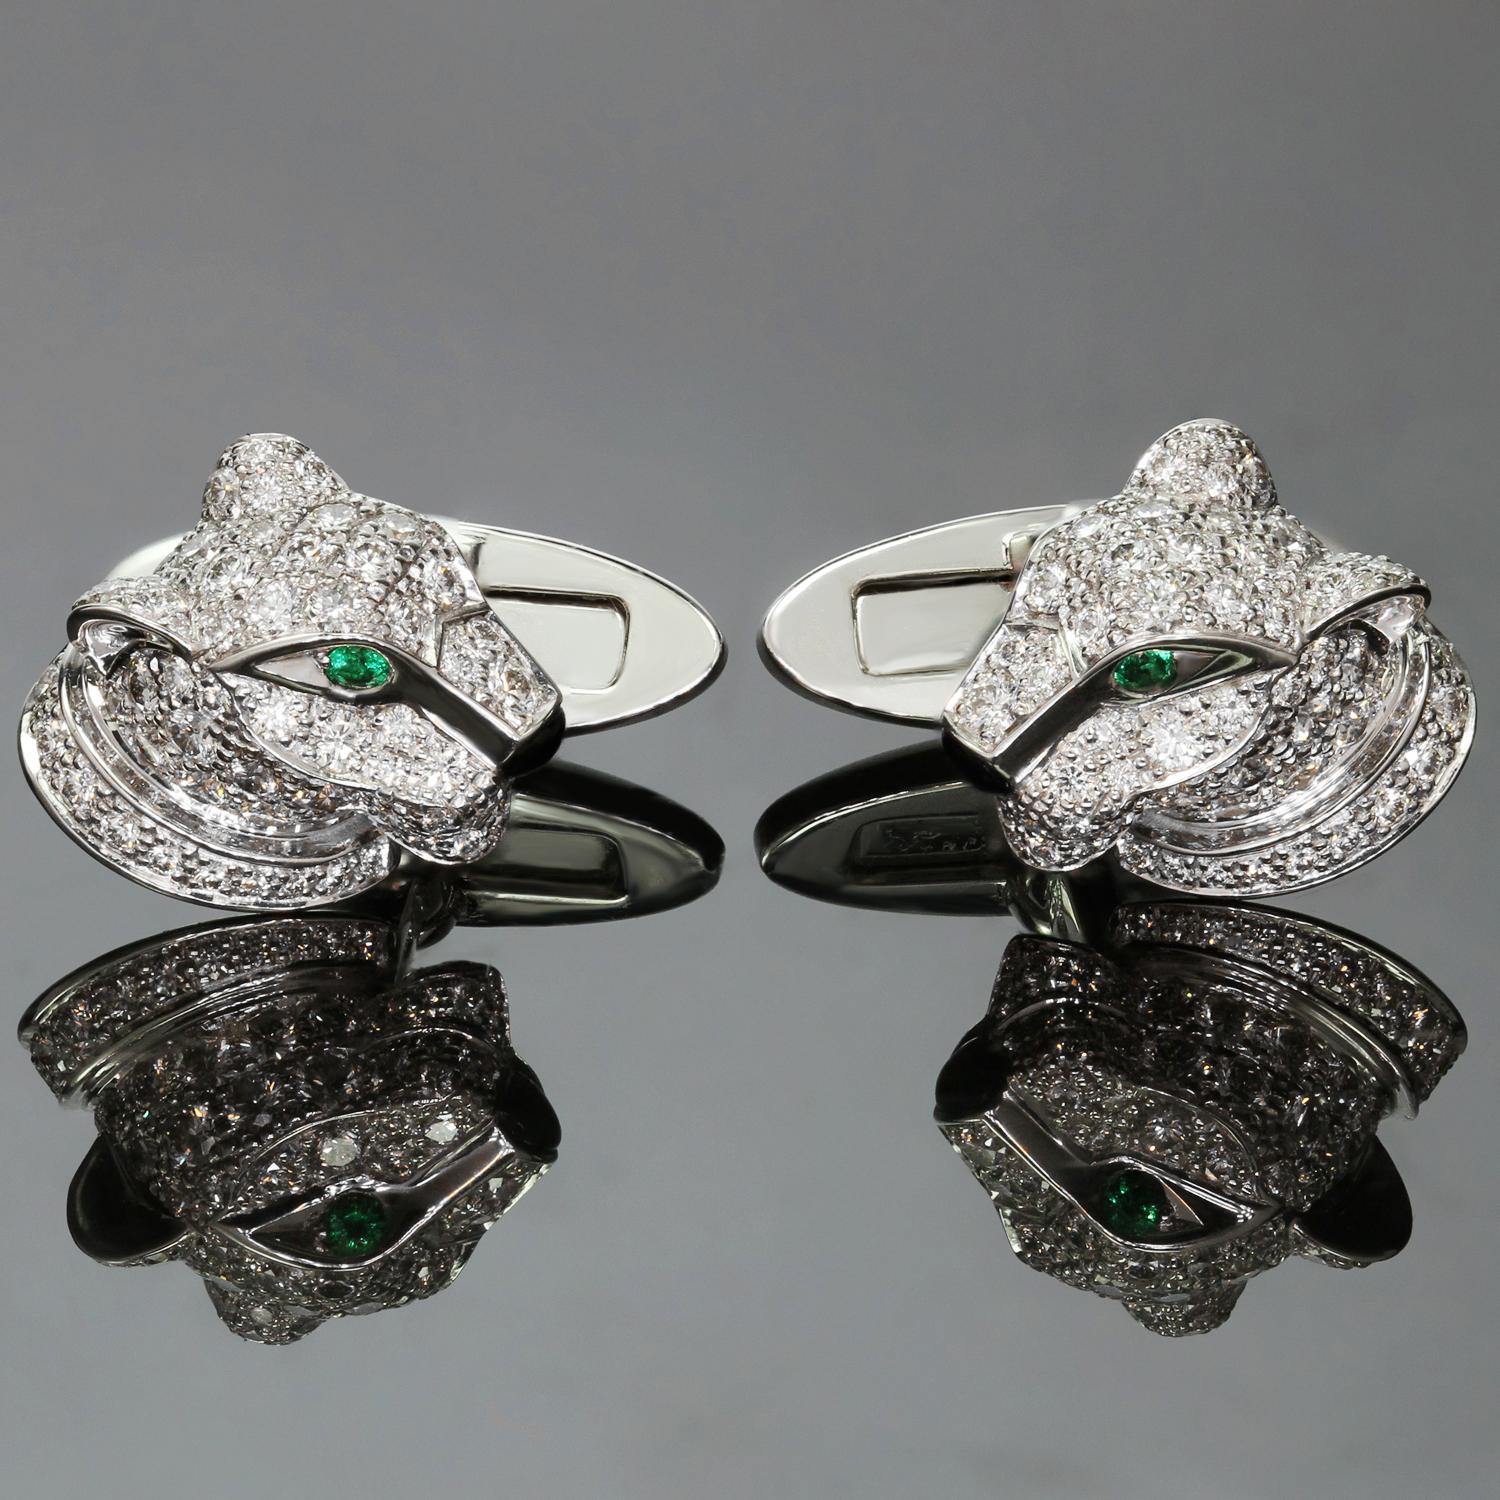 These chic cufflinks from Cartier's iconic Panthère de Cartier collection are crafted in 18k white gold and feature a sparkling motif of diamond-paved panther heads accented with emerald eyes and onyx noses. Made in France circa 2000s. Measurements: